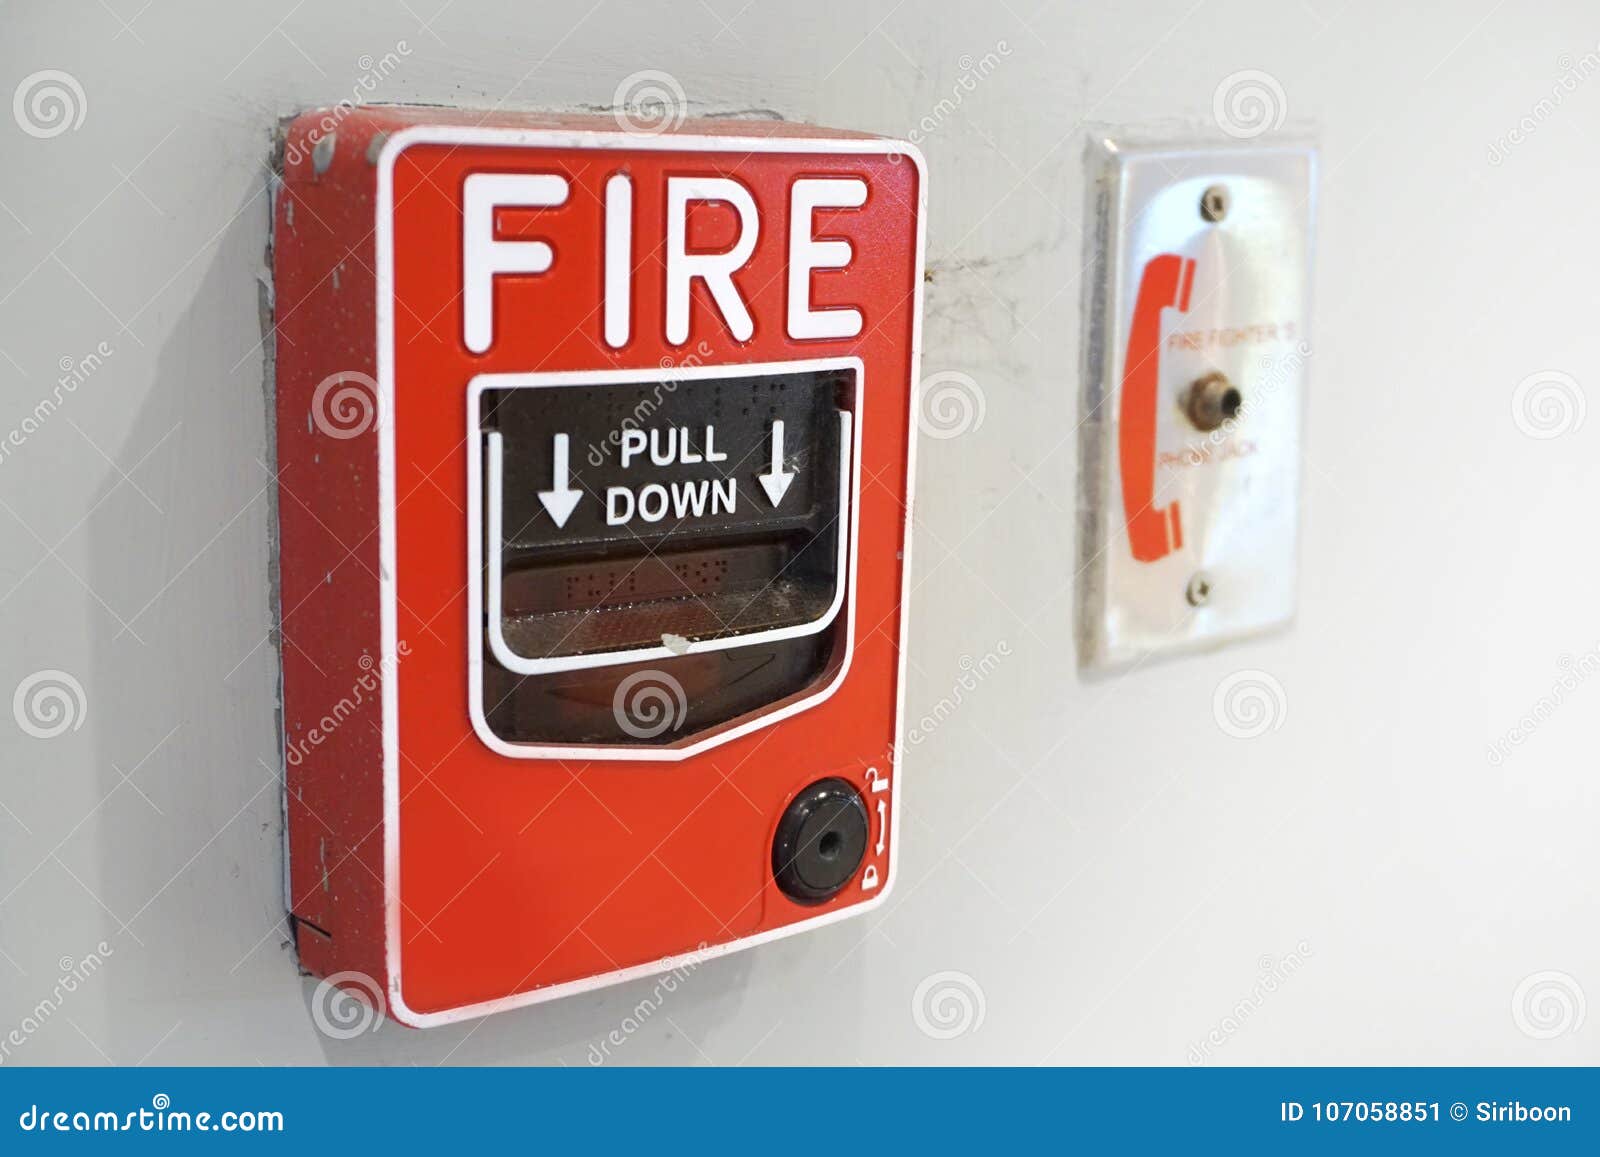 The Red Fire Alarm and Equipment on the White Wall. Stock Image - Image ...